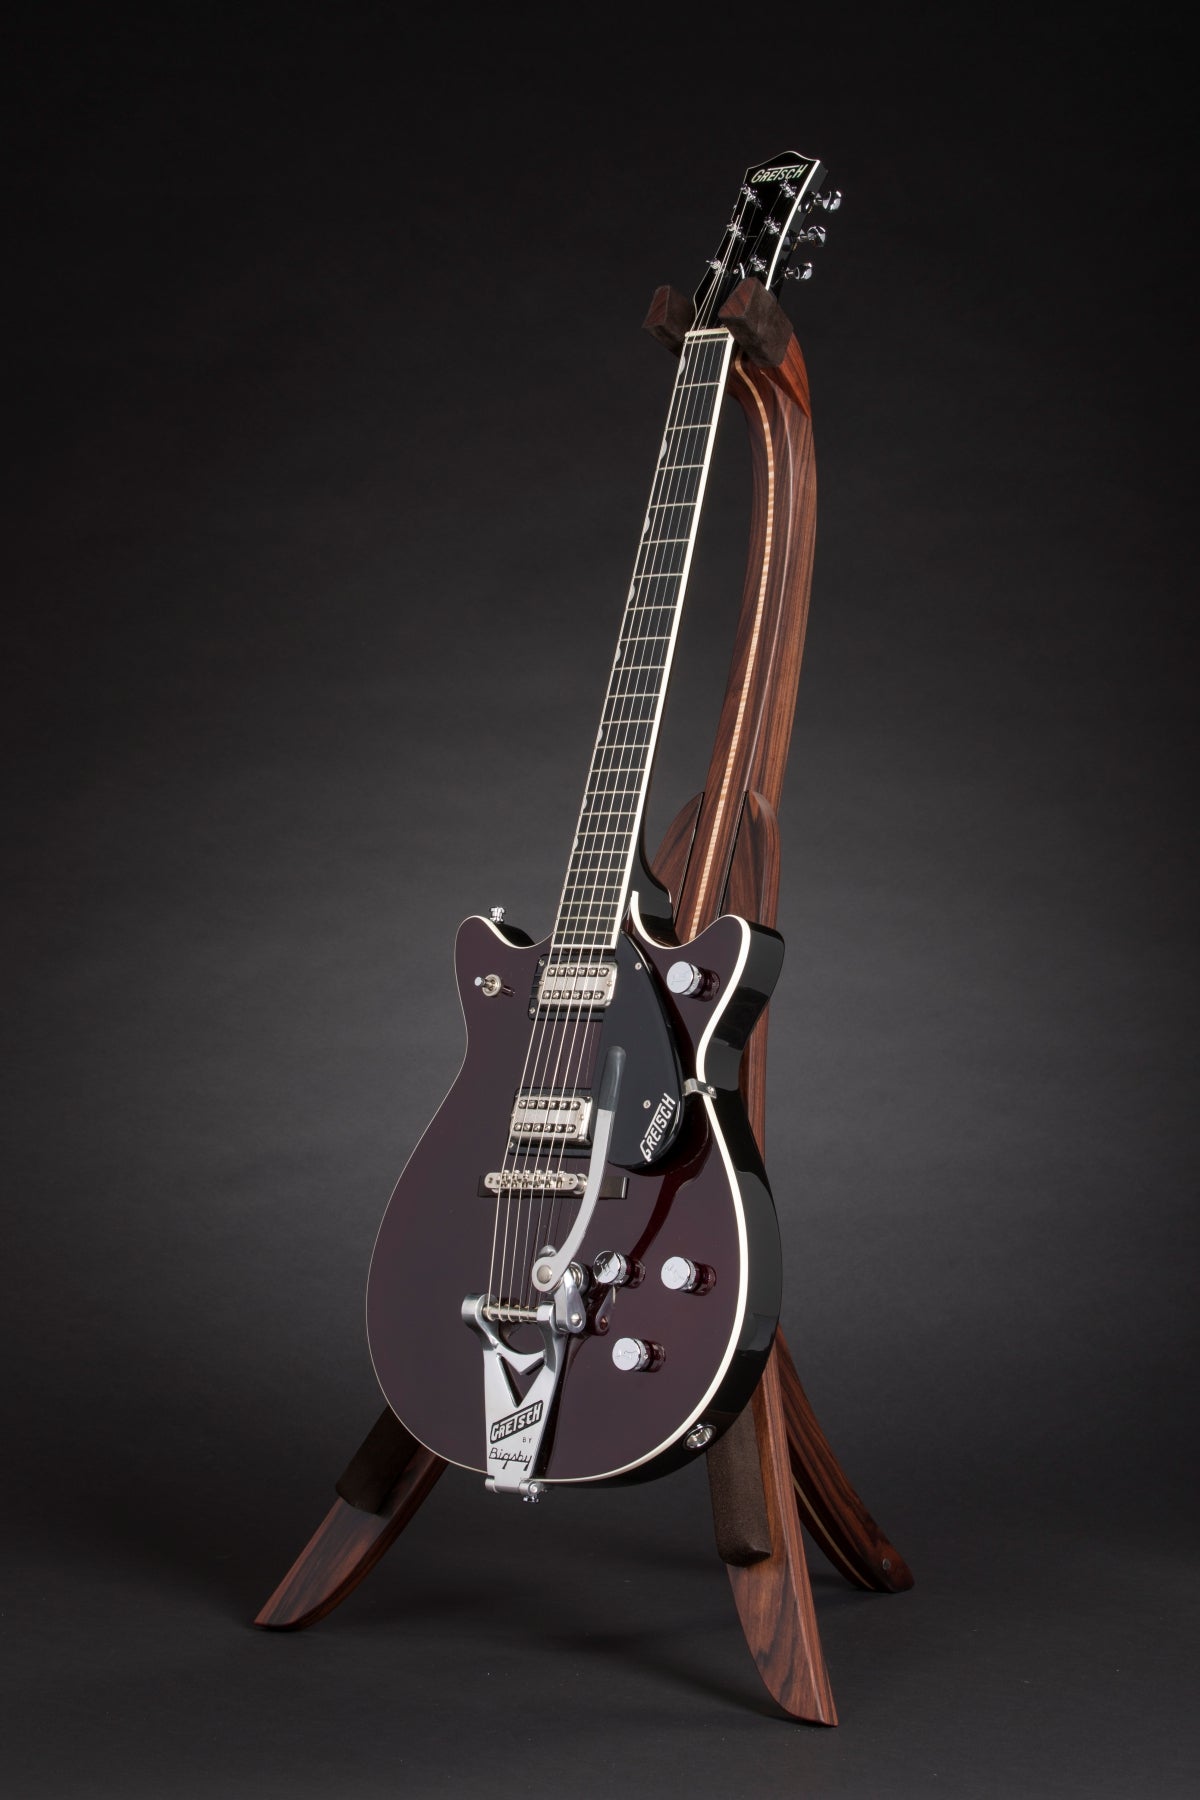 Folding morado Bolivian rosewood pau fero and curly maple wood guitar floor stand full front image with Gretsch guitar